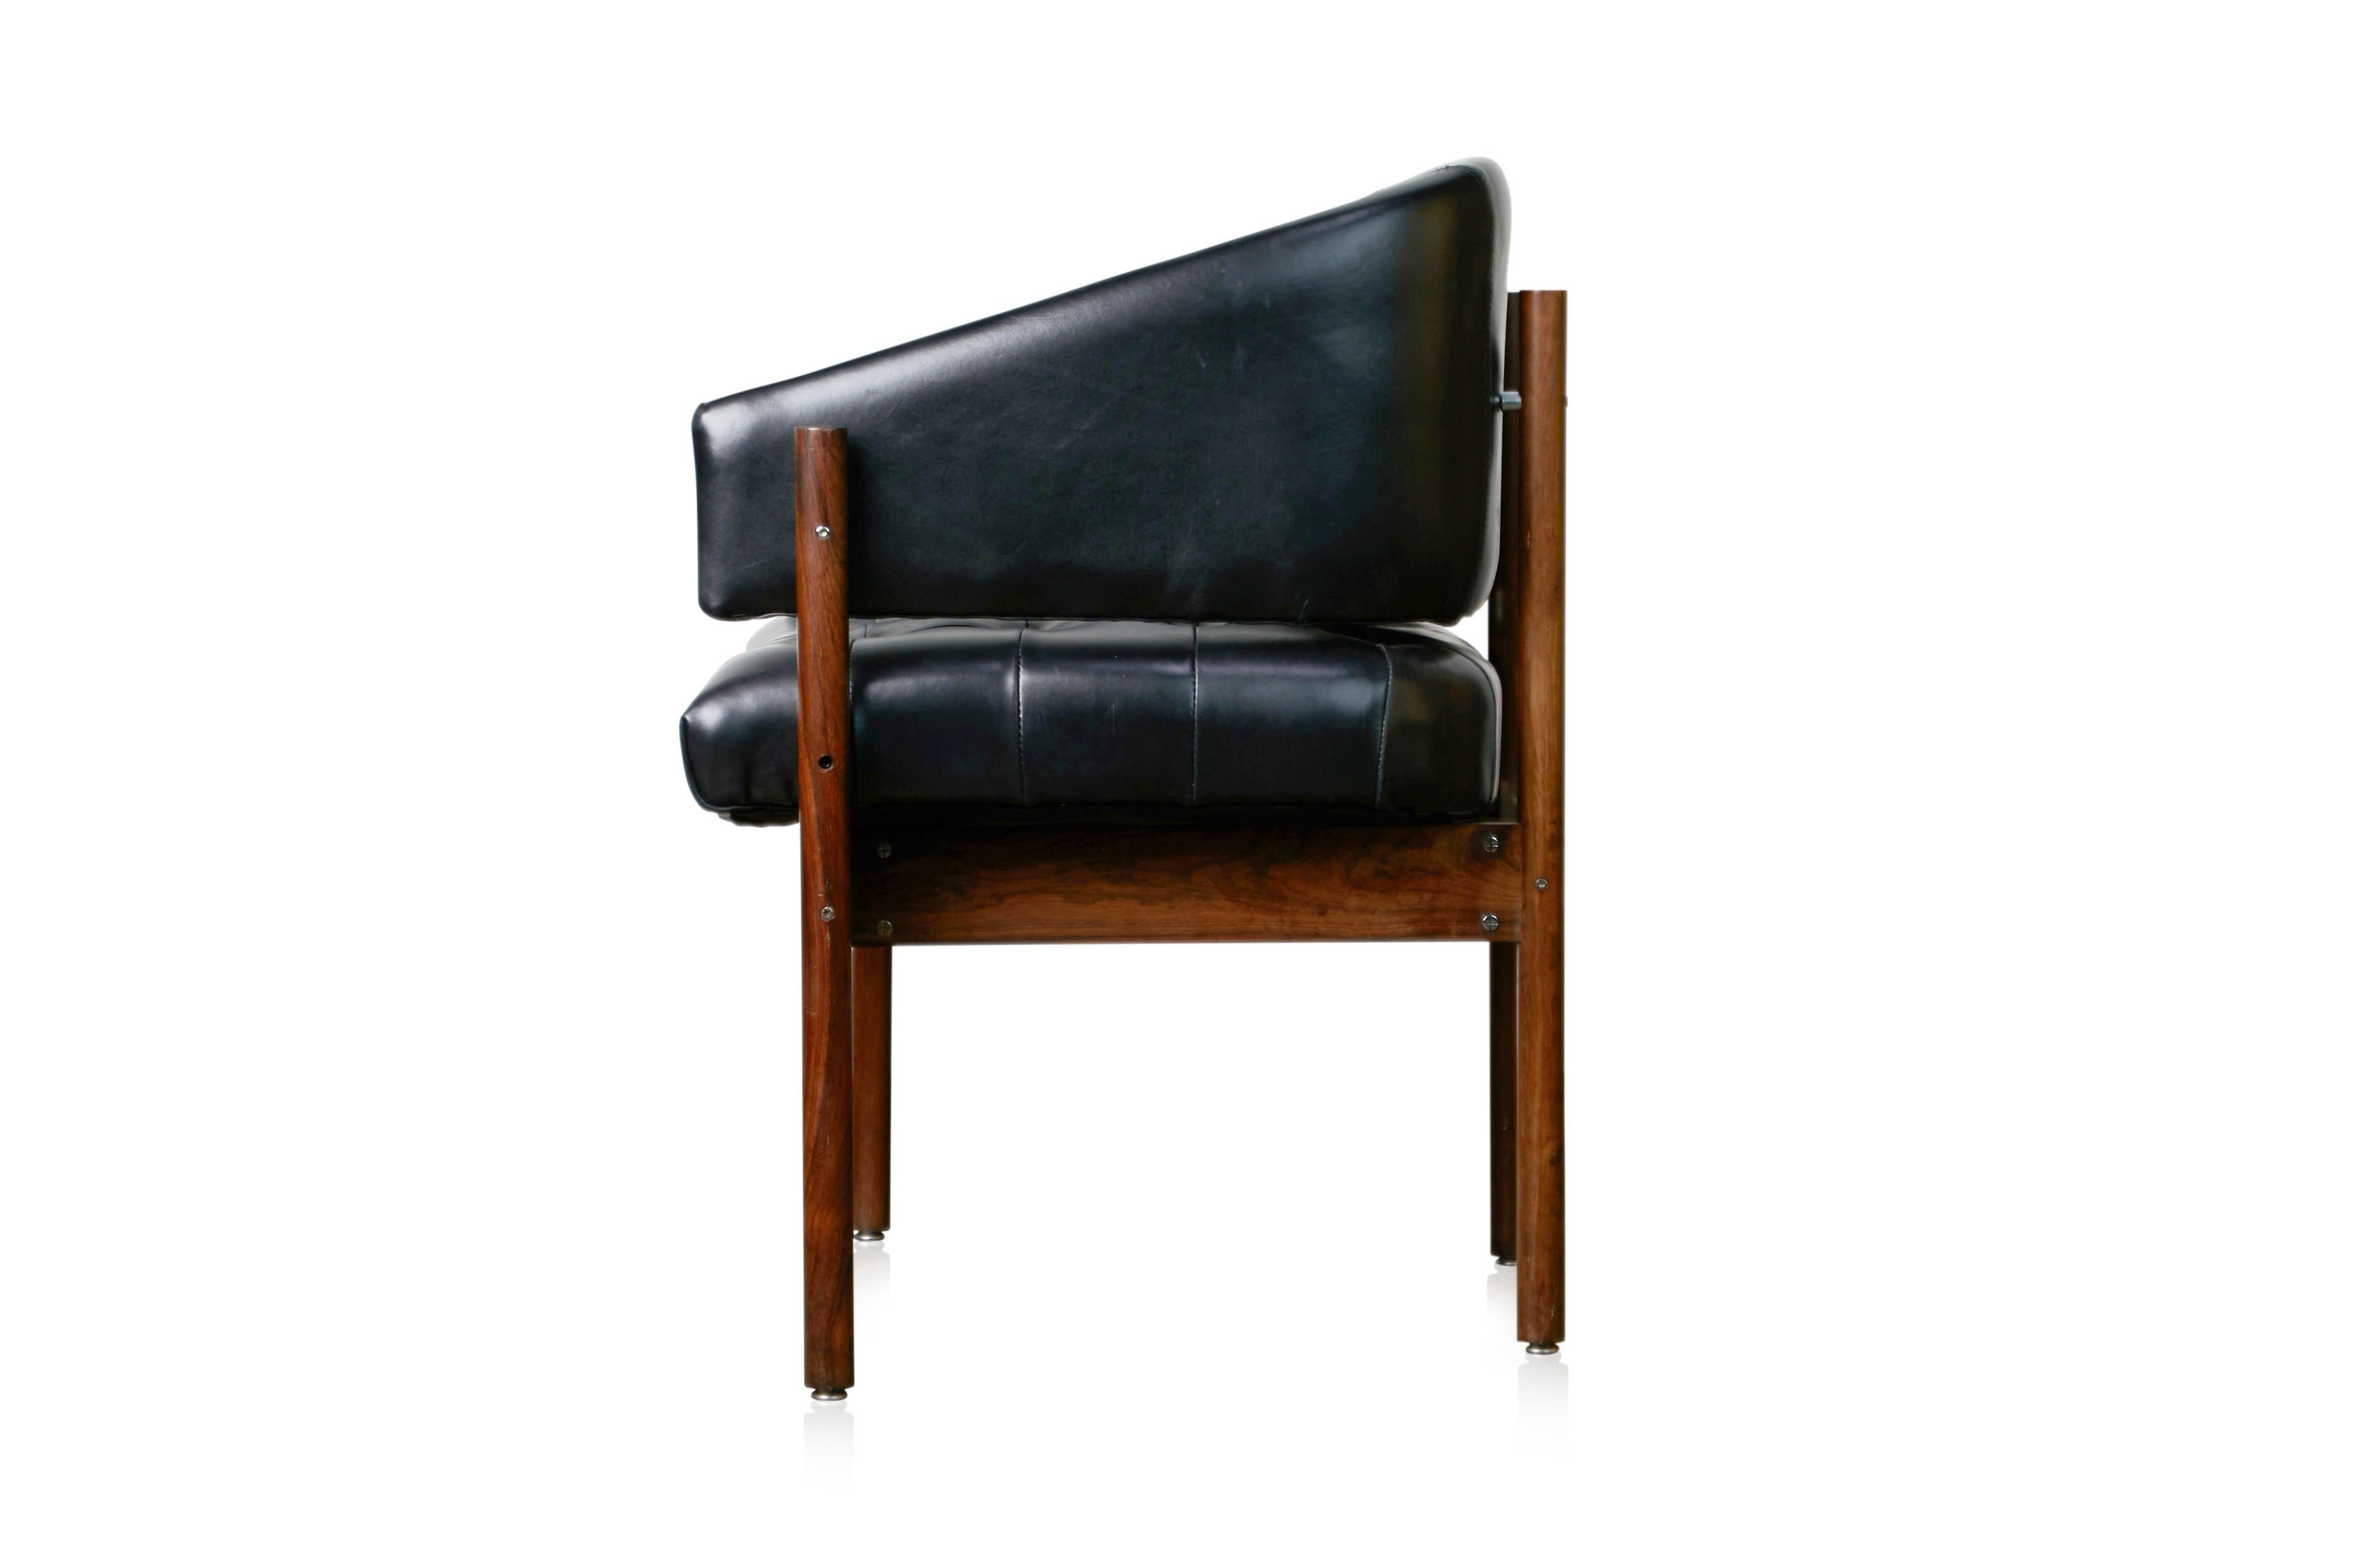 Jorge Zalszupin 'Senior' Rosewood & Leather Armchairs, Produced in 1972, Brazil 1